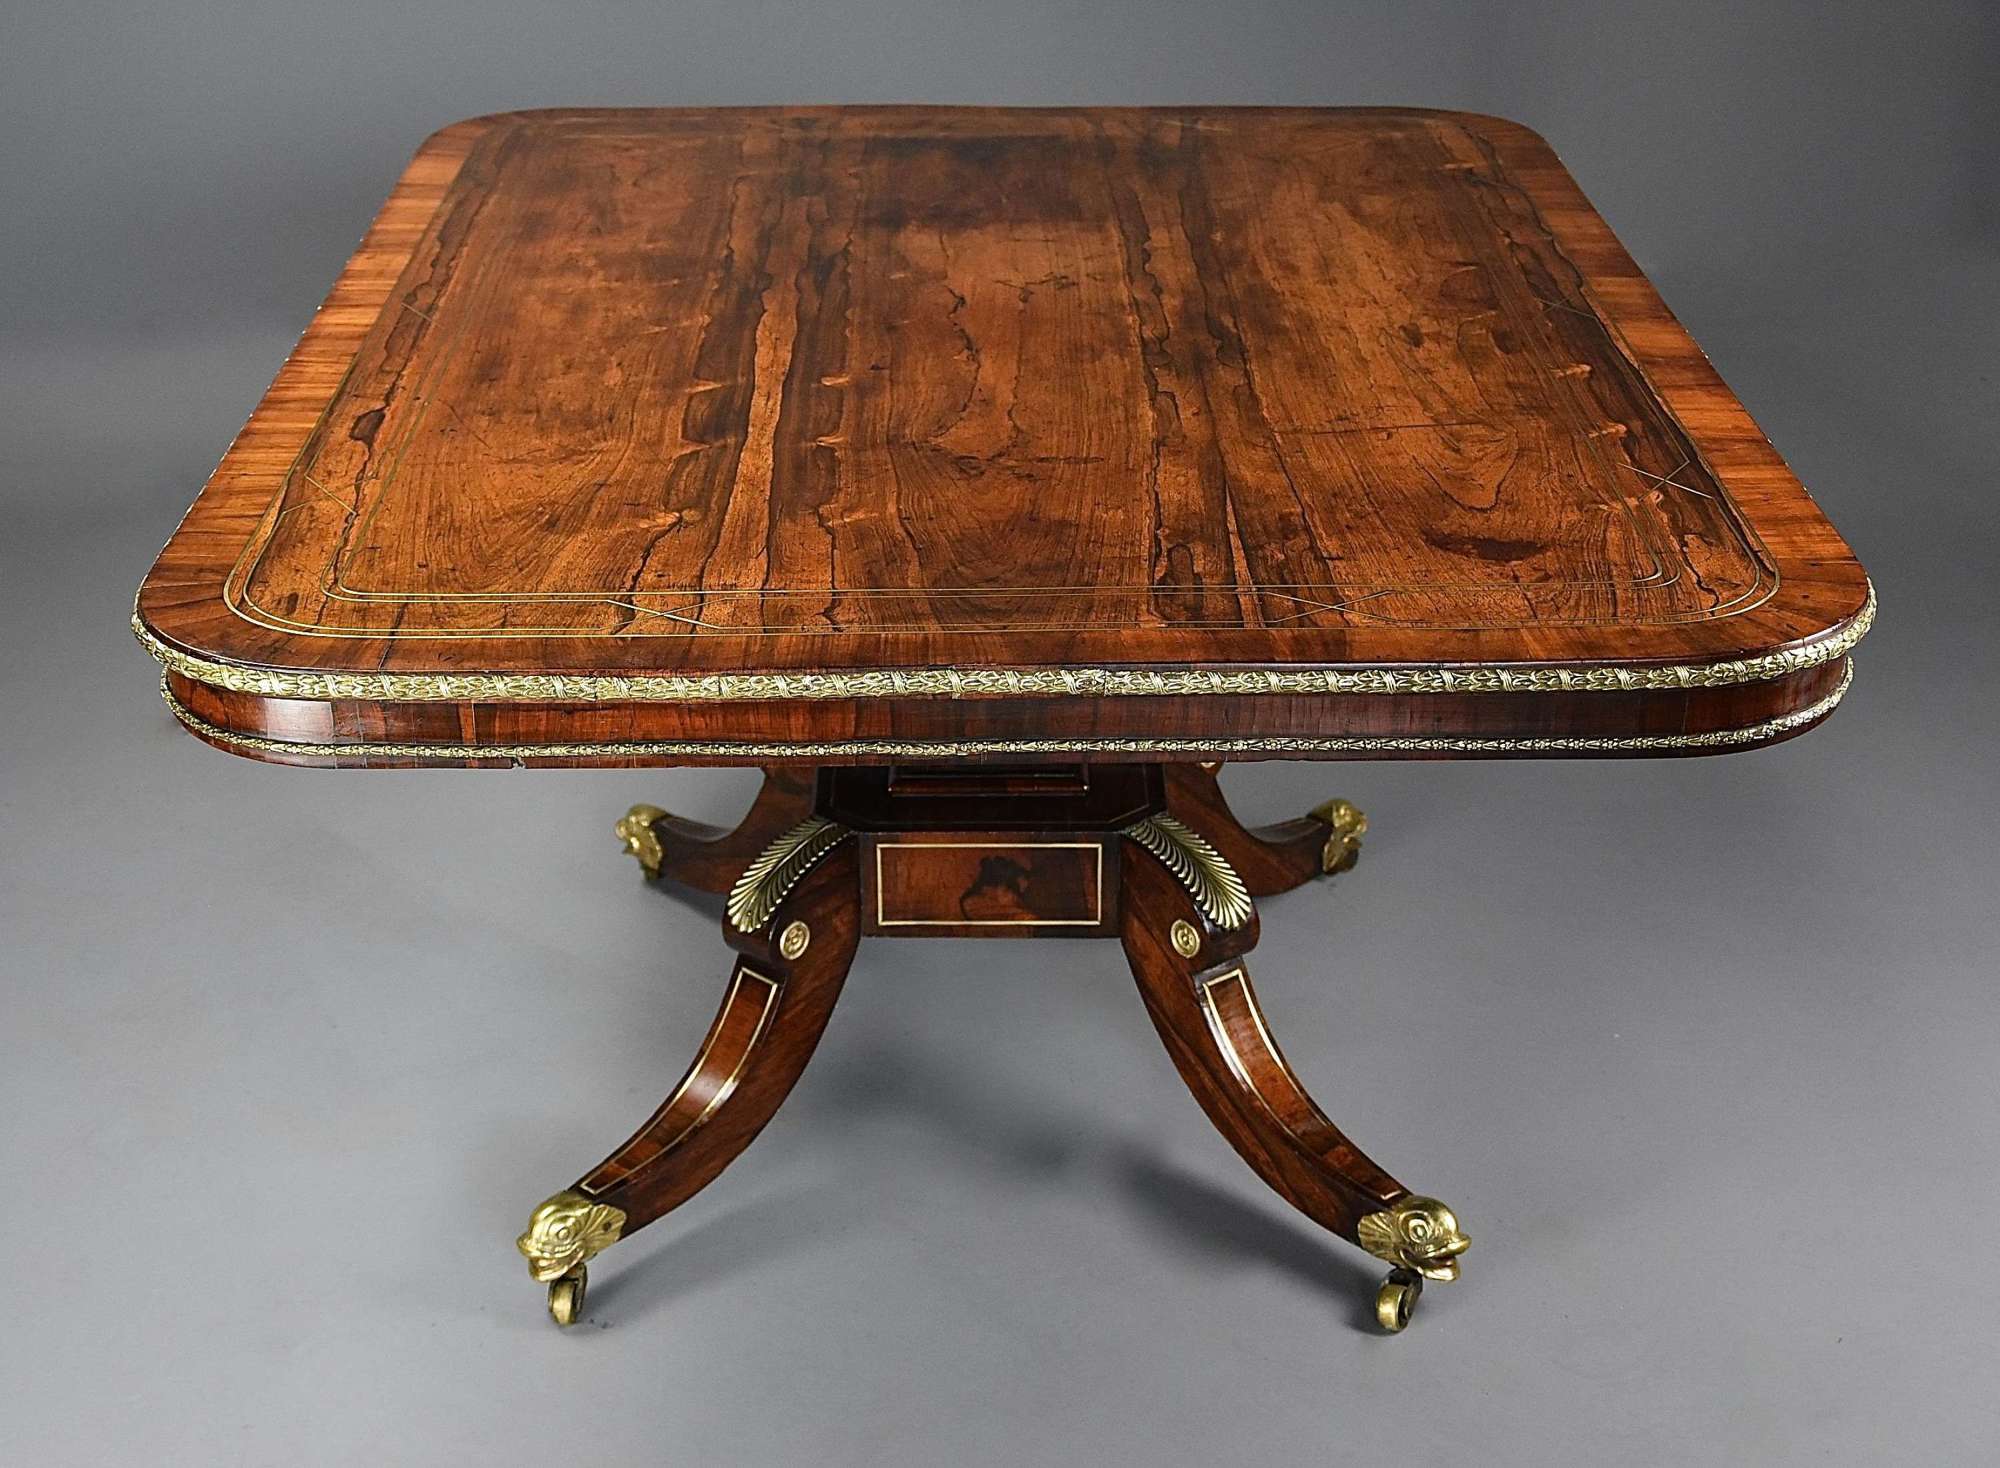 Fine quality Regency rosewood breakfast table of exceptional patina